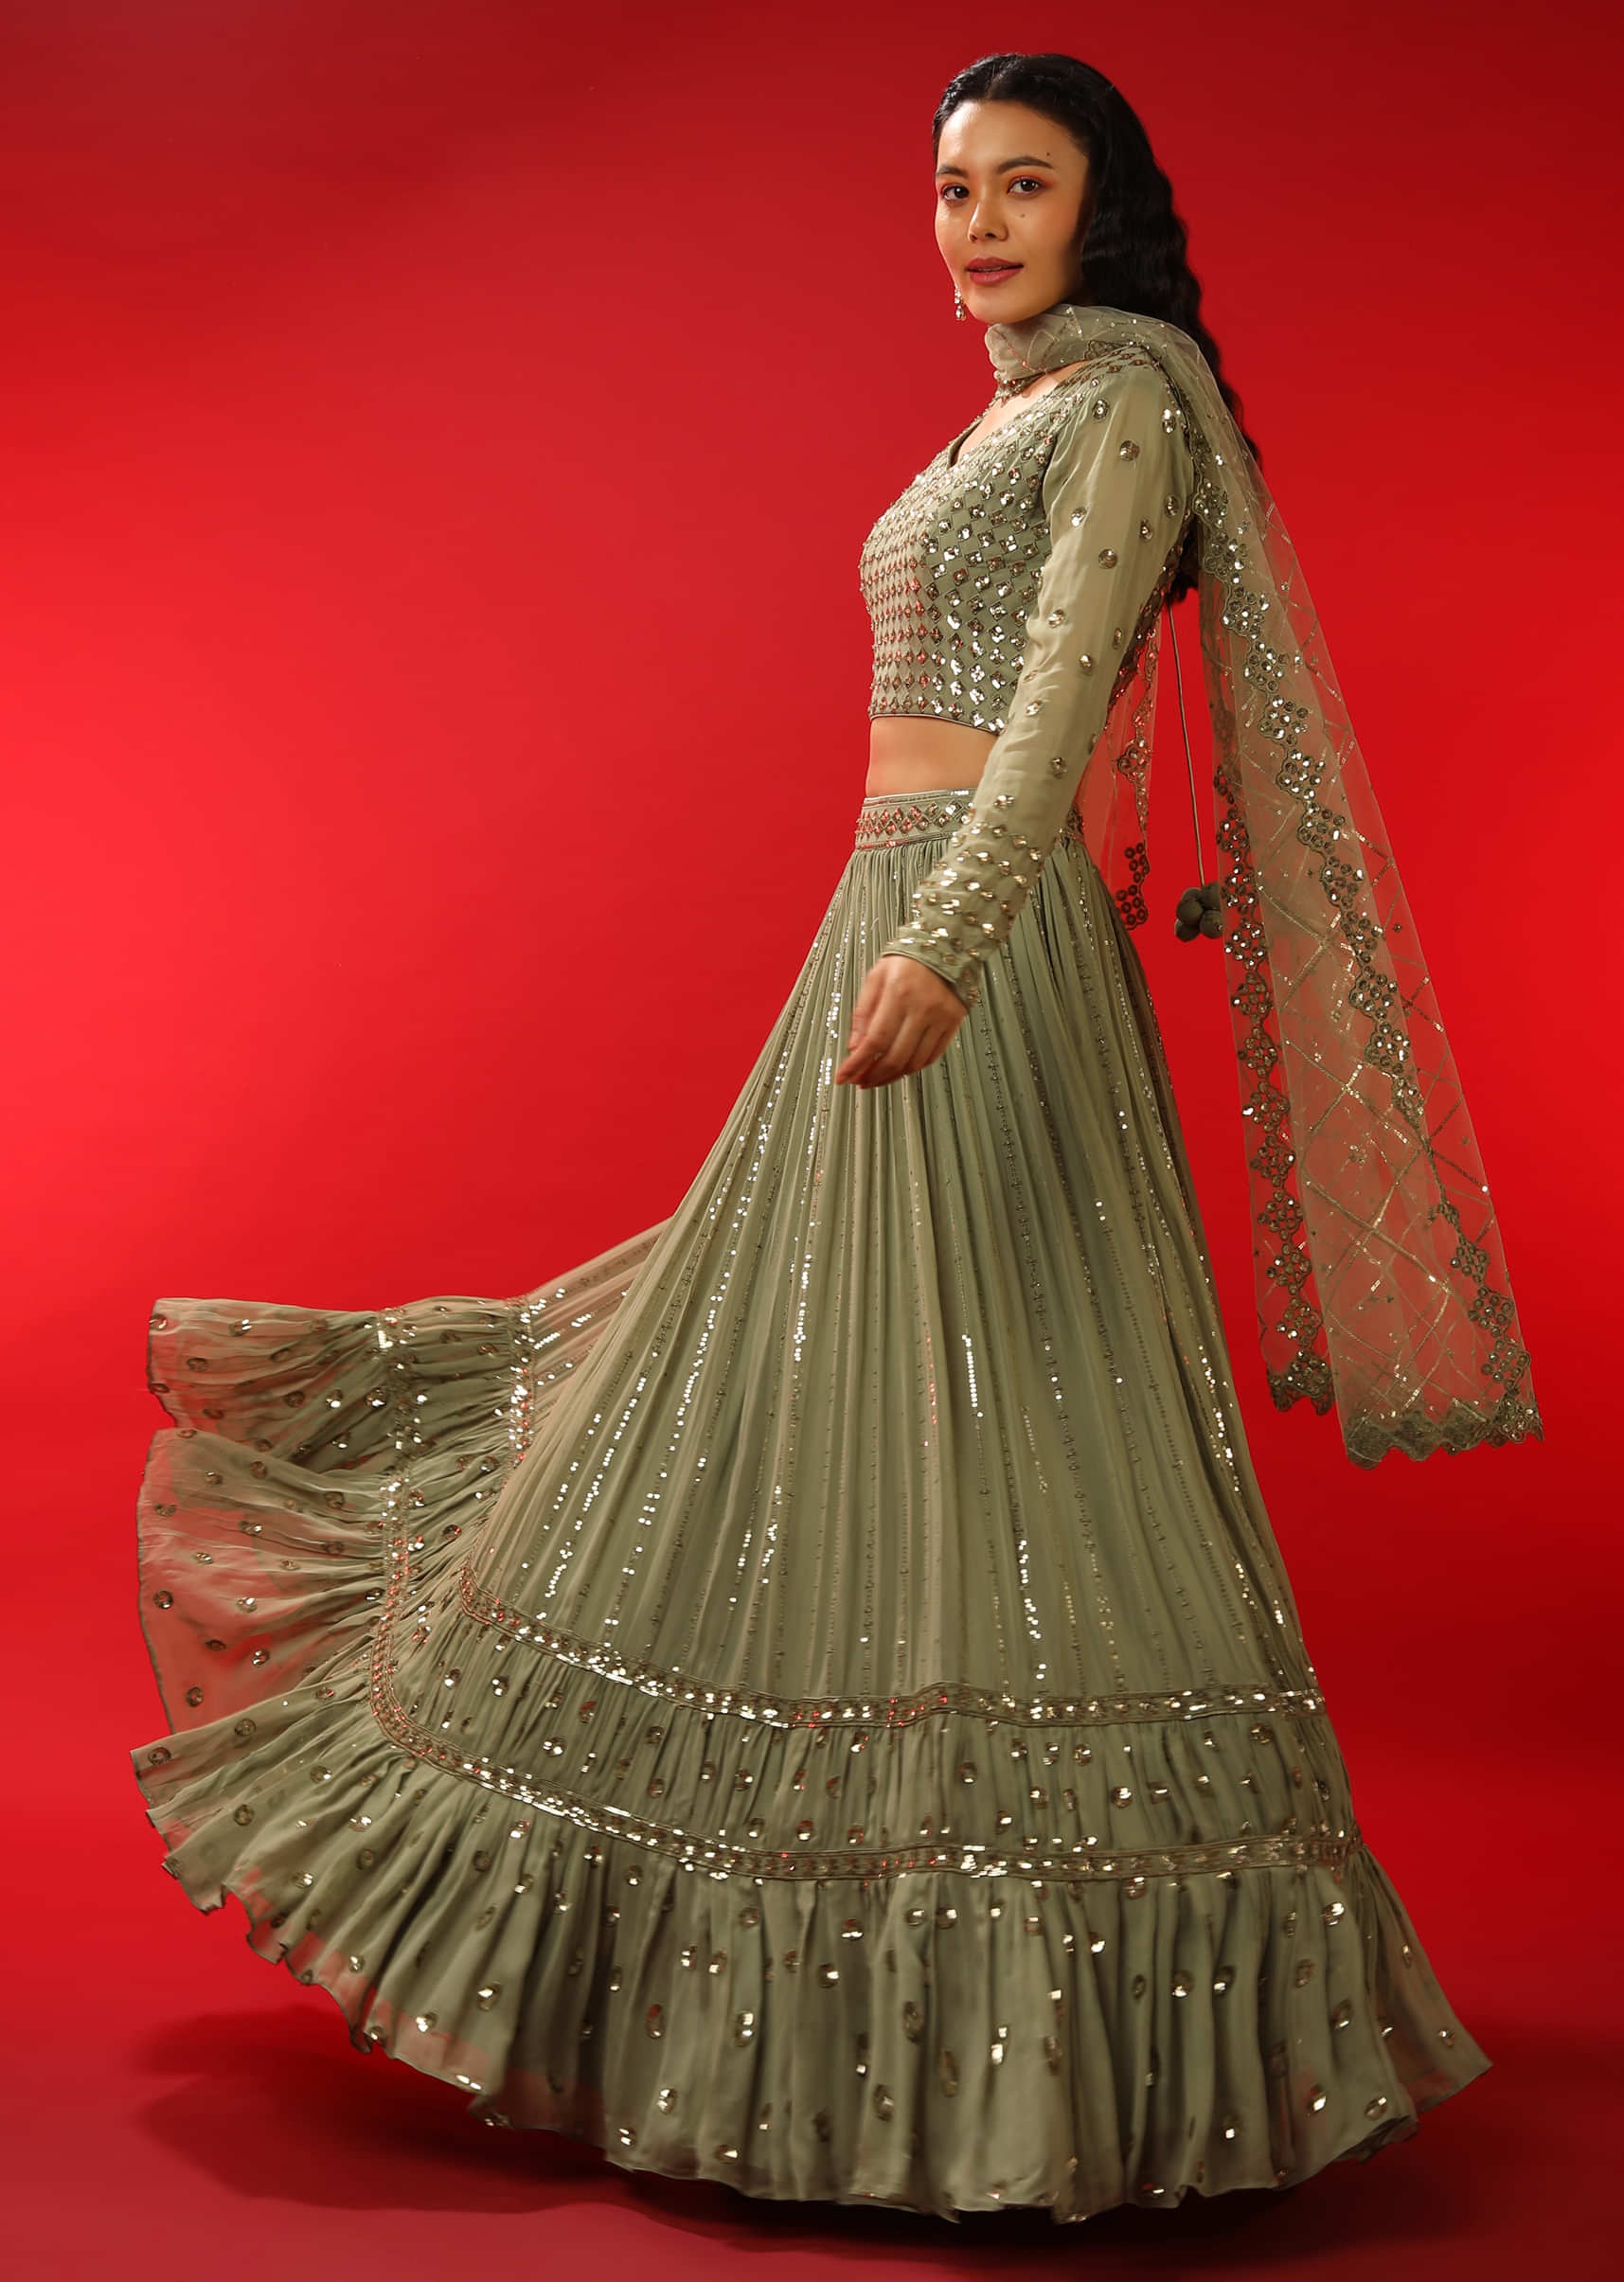 Sage Green Lehenga Choli With Sequins Embroidered Geometric Motifs And Stripes 